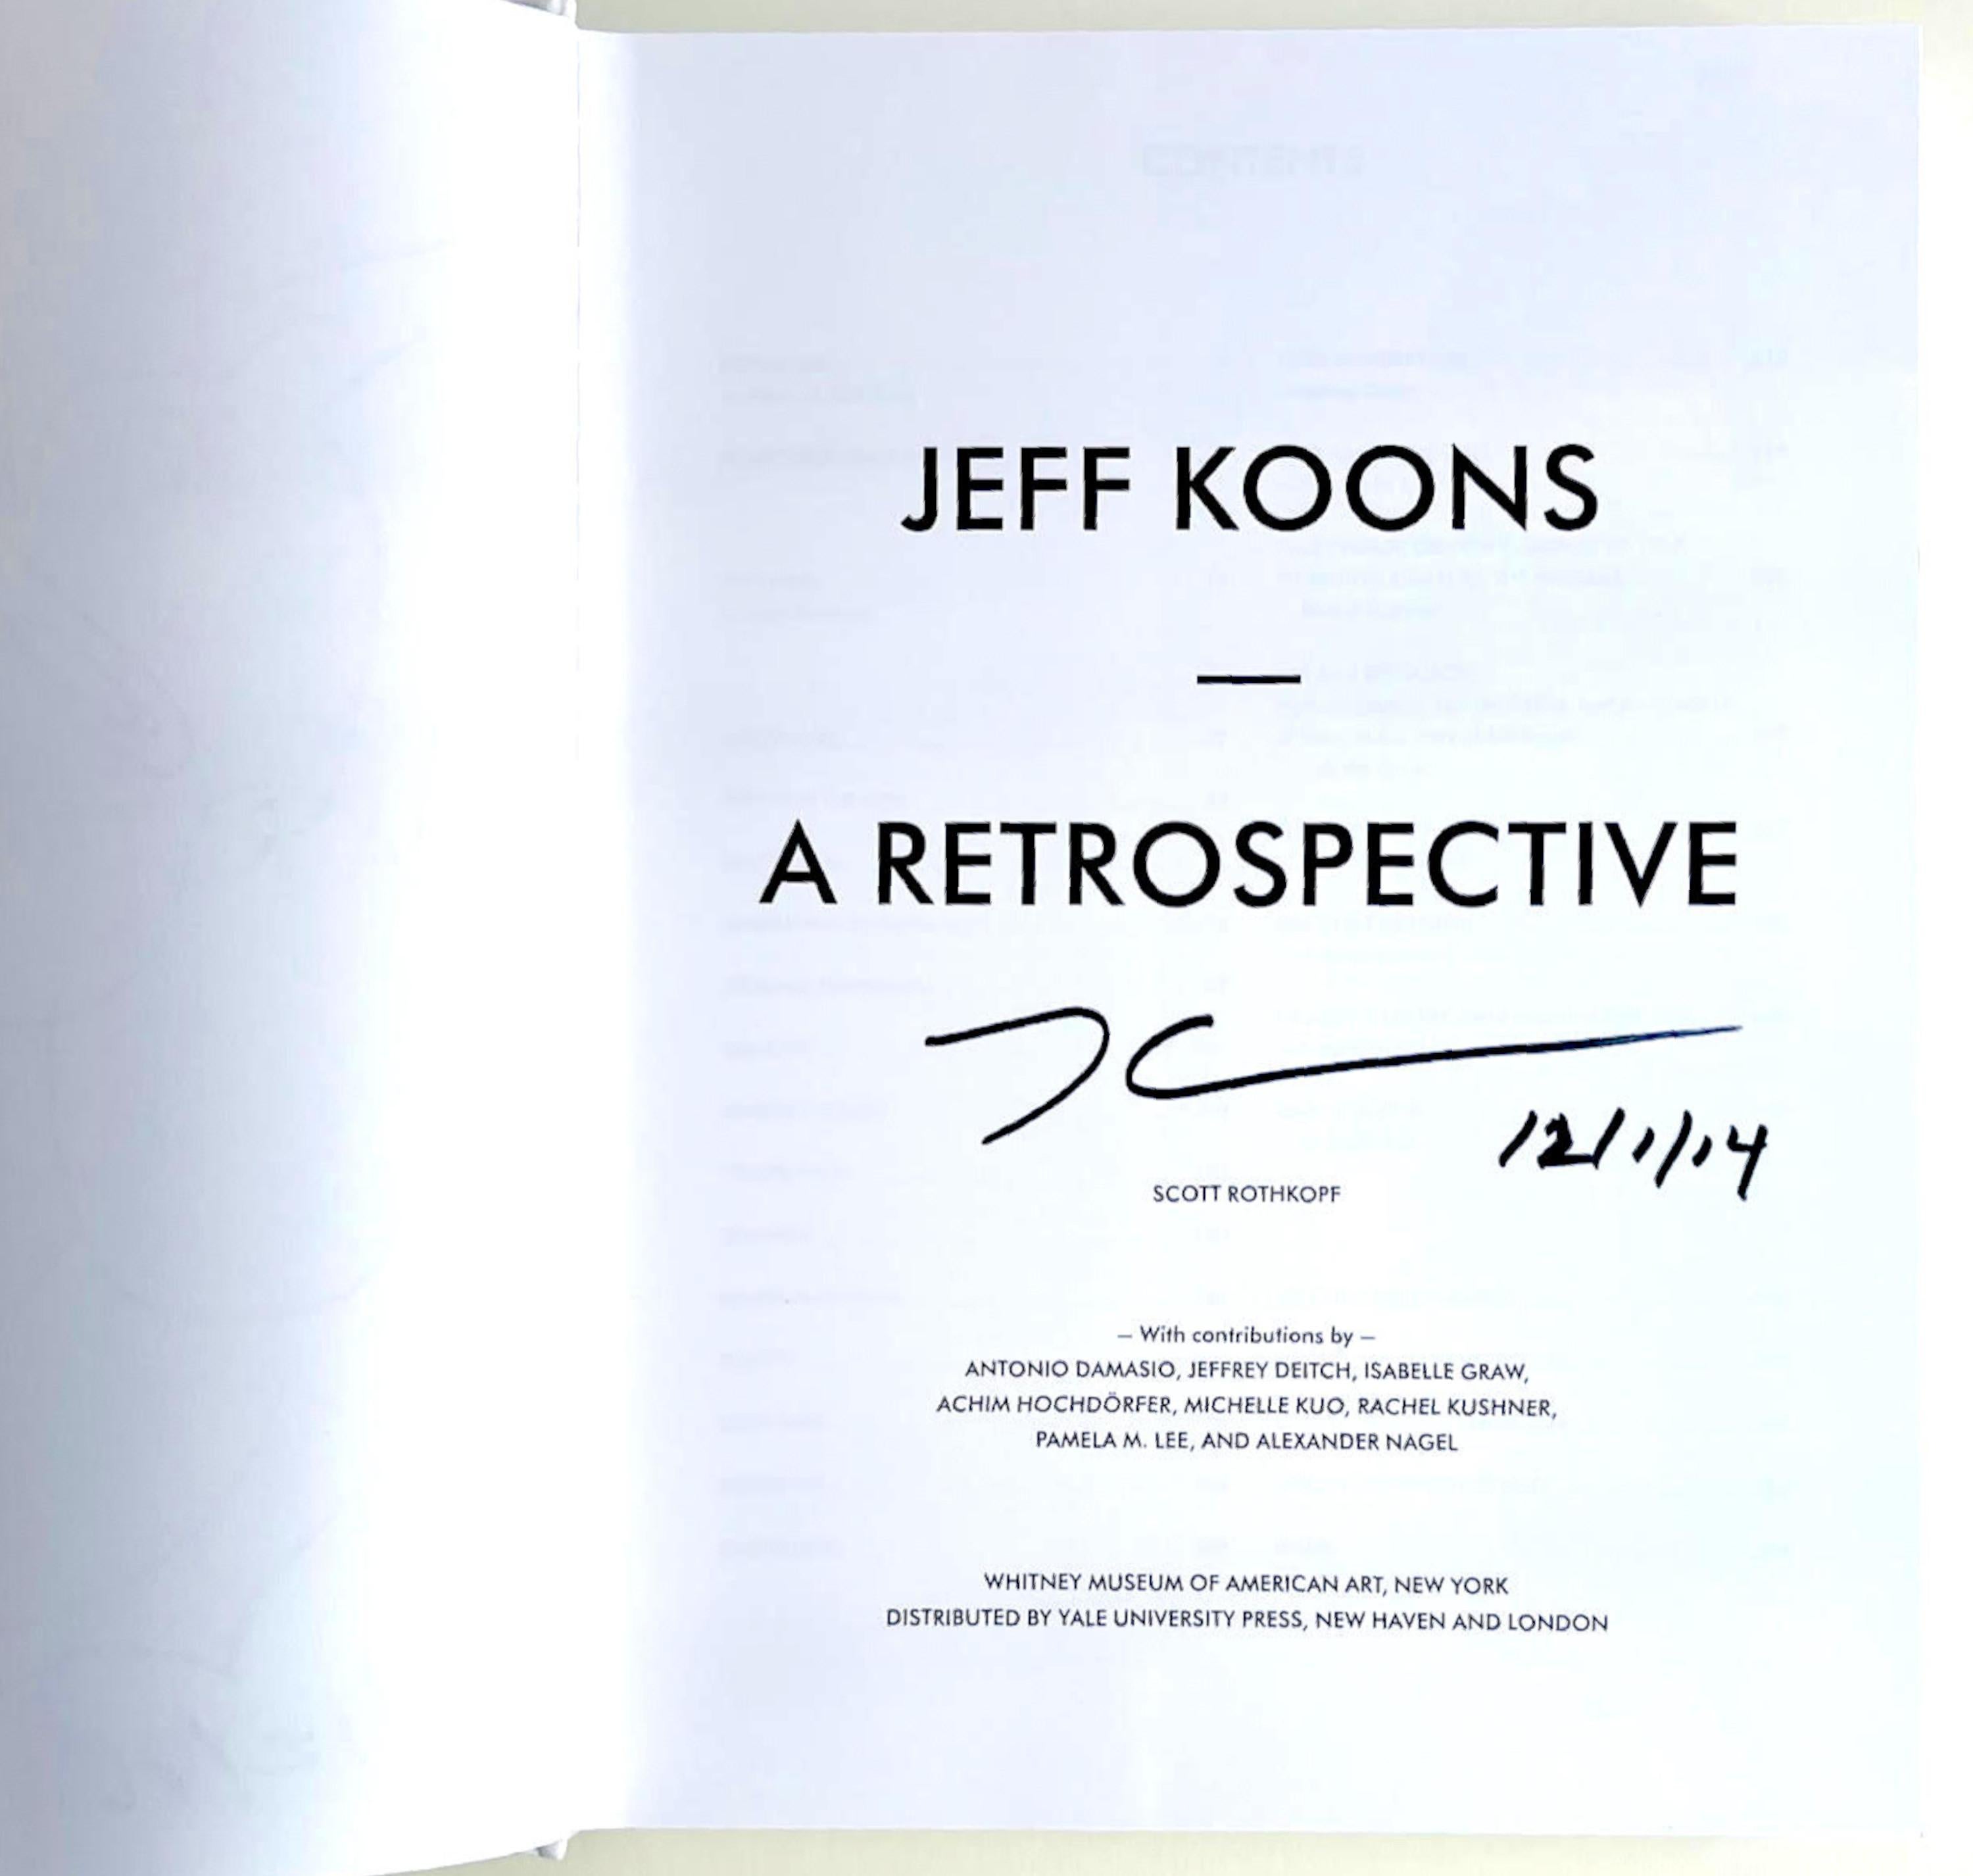 Jeff Koons
Original Flower Drawing (signed twice), 2016
Original, hand signed drawing inscribed to Nadine, done with silver sharpie, and held in hardback monograph with dust jacket, signed in black marker on the title page
Boldy signed and dated on